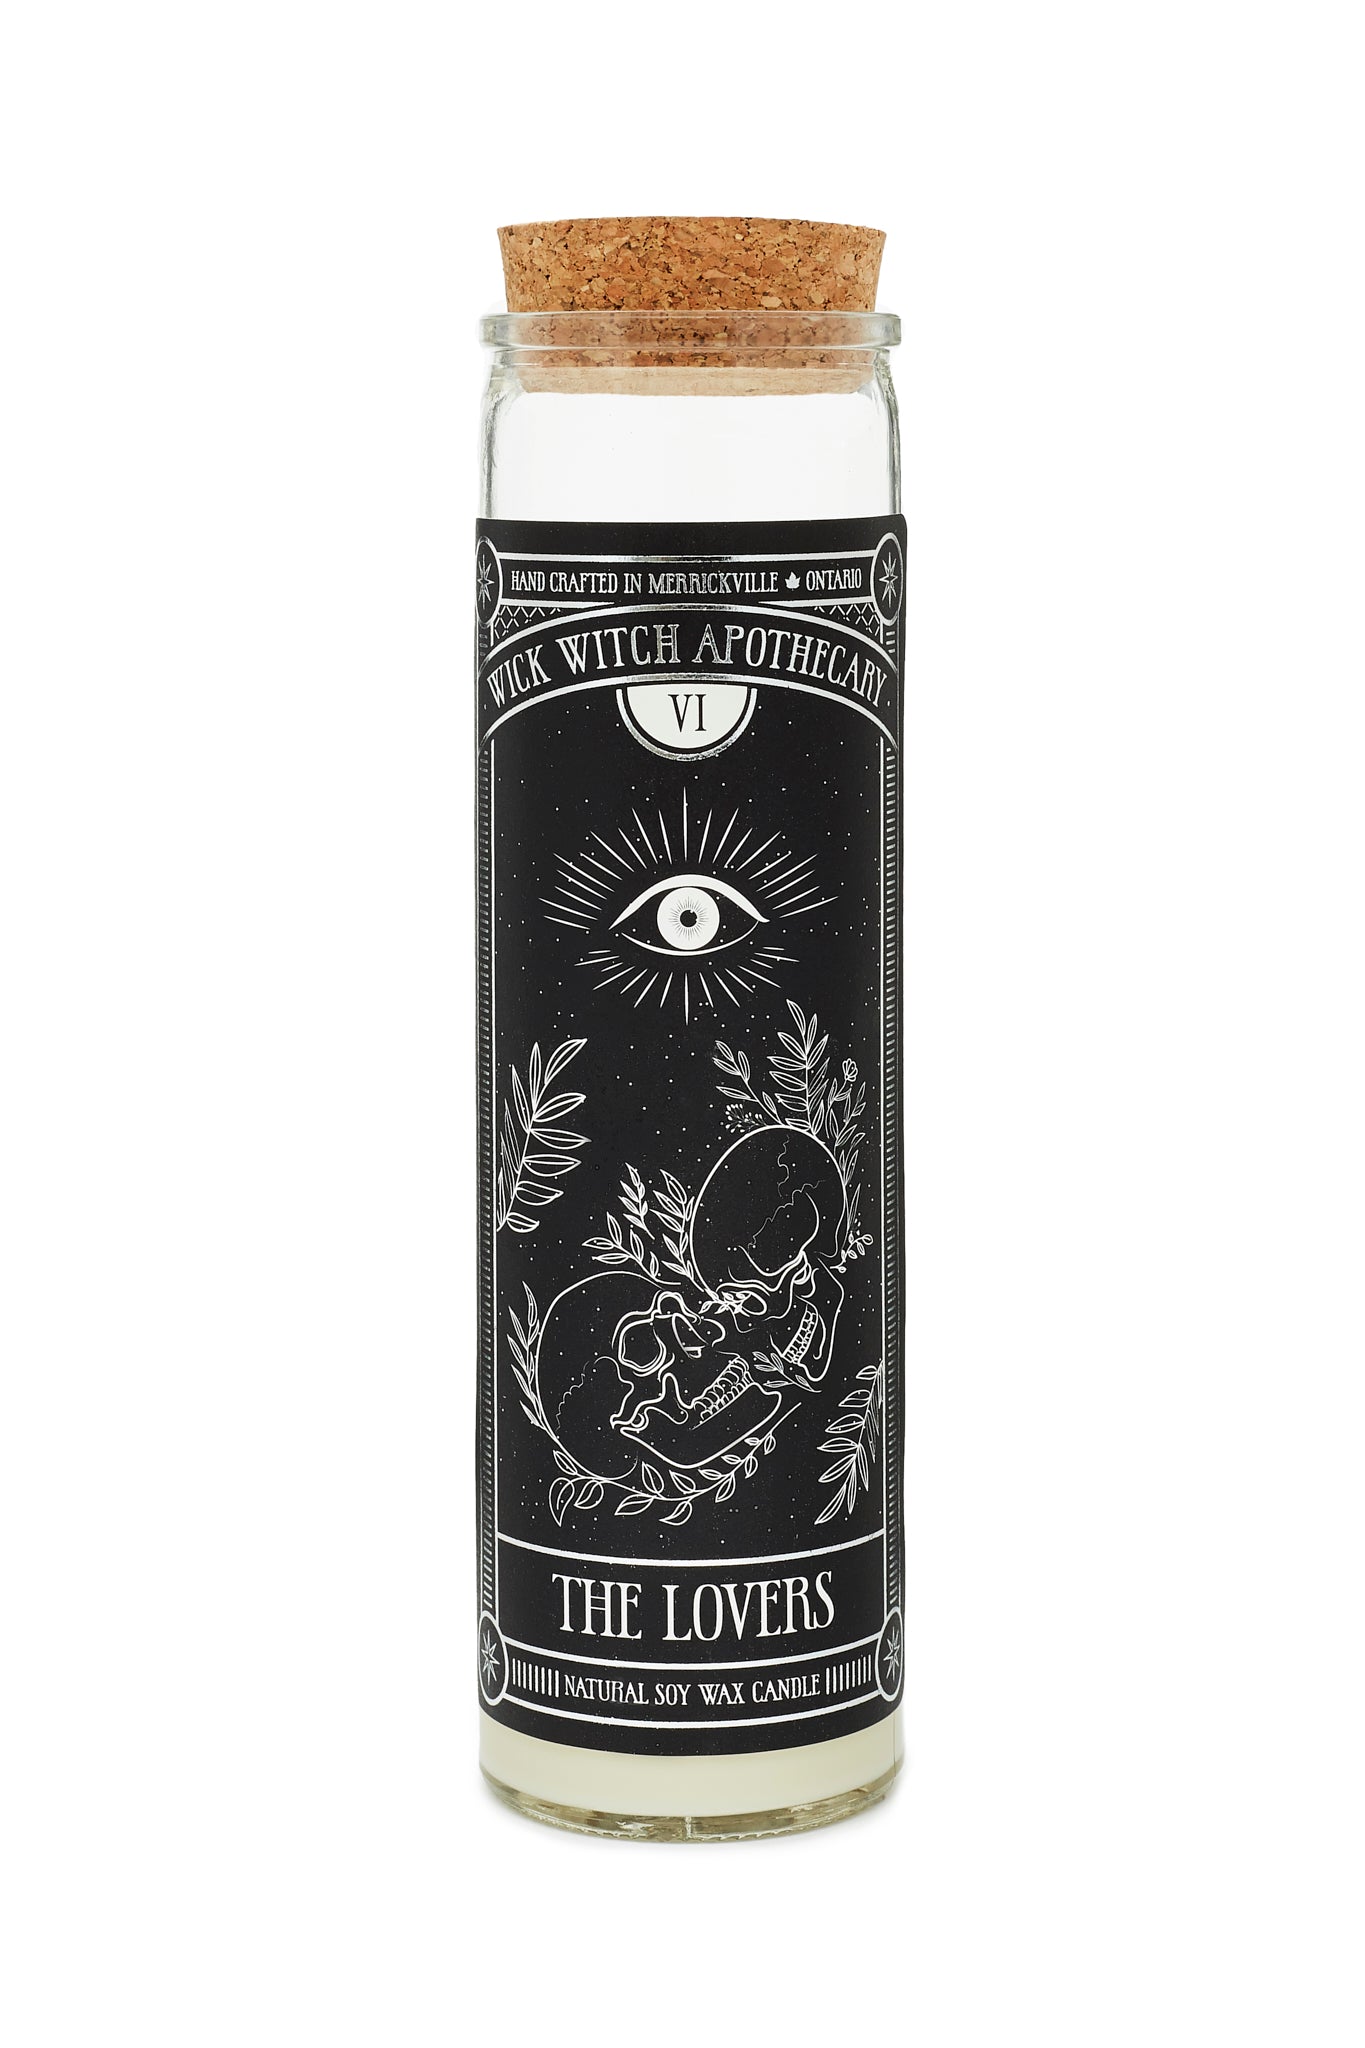 THE LOVERS TAROT CANDLE